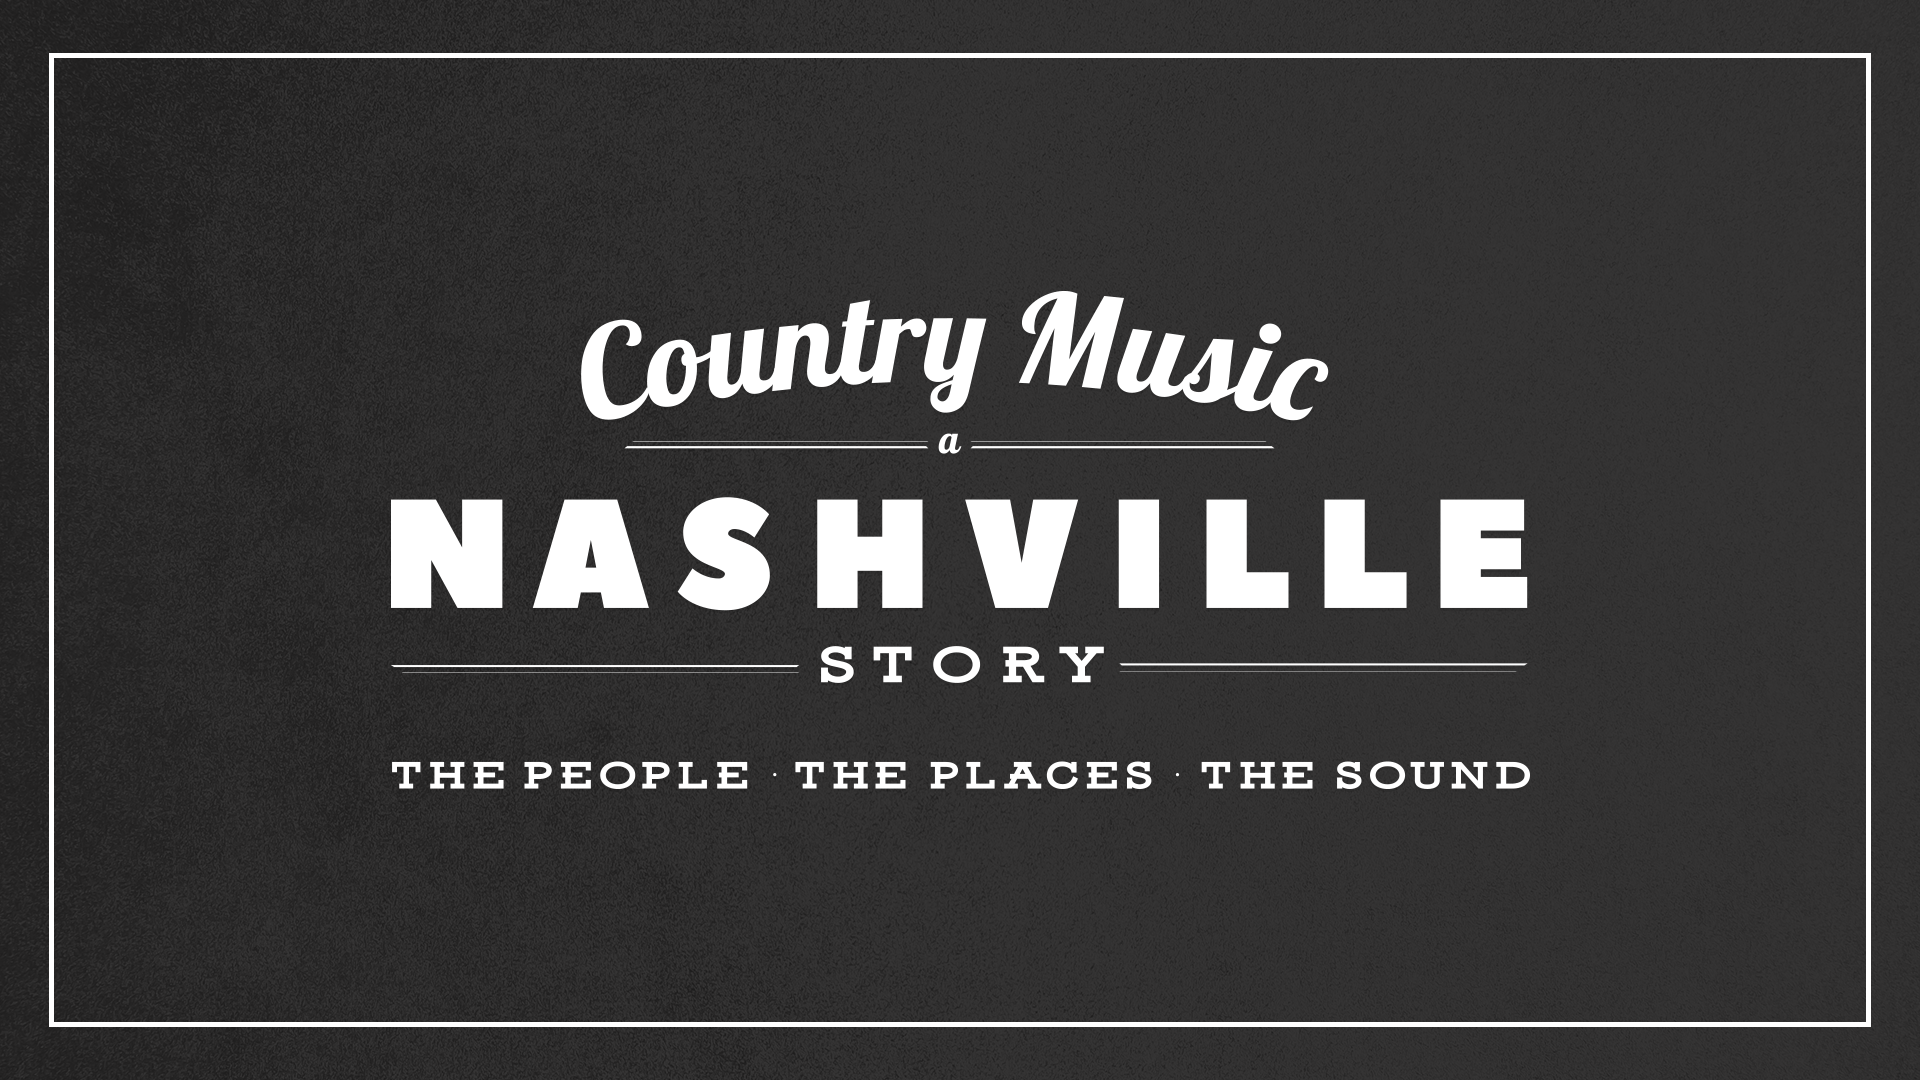 NPT's Country Music: A Nashville Story